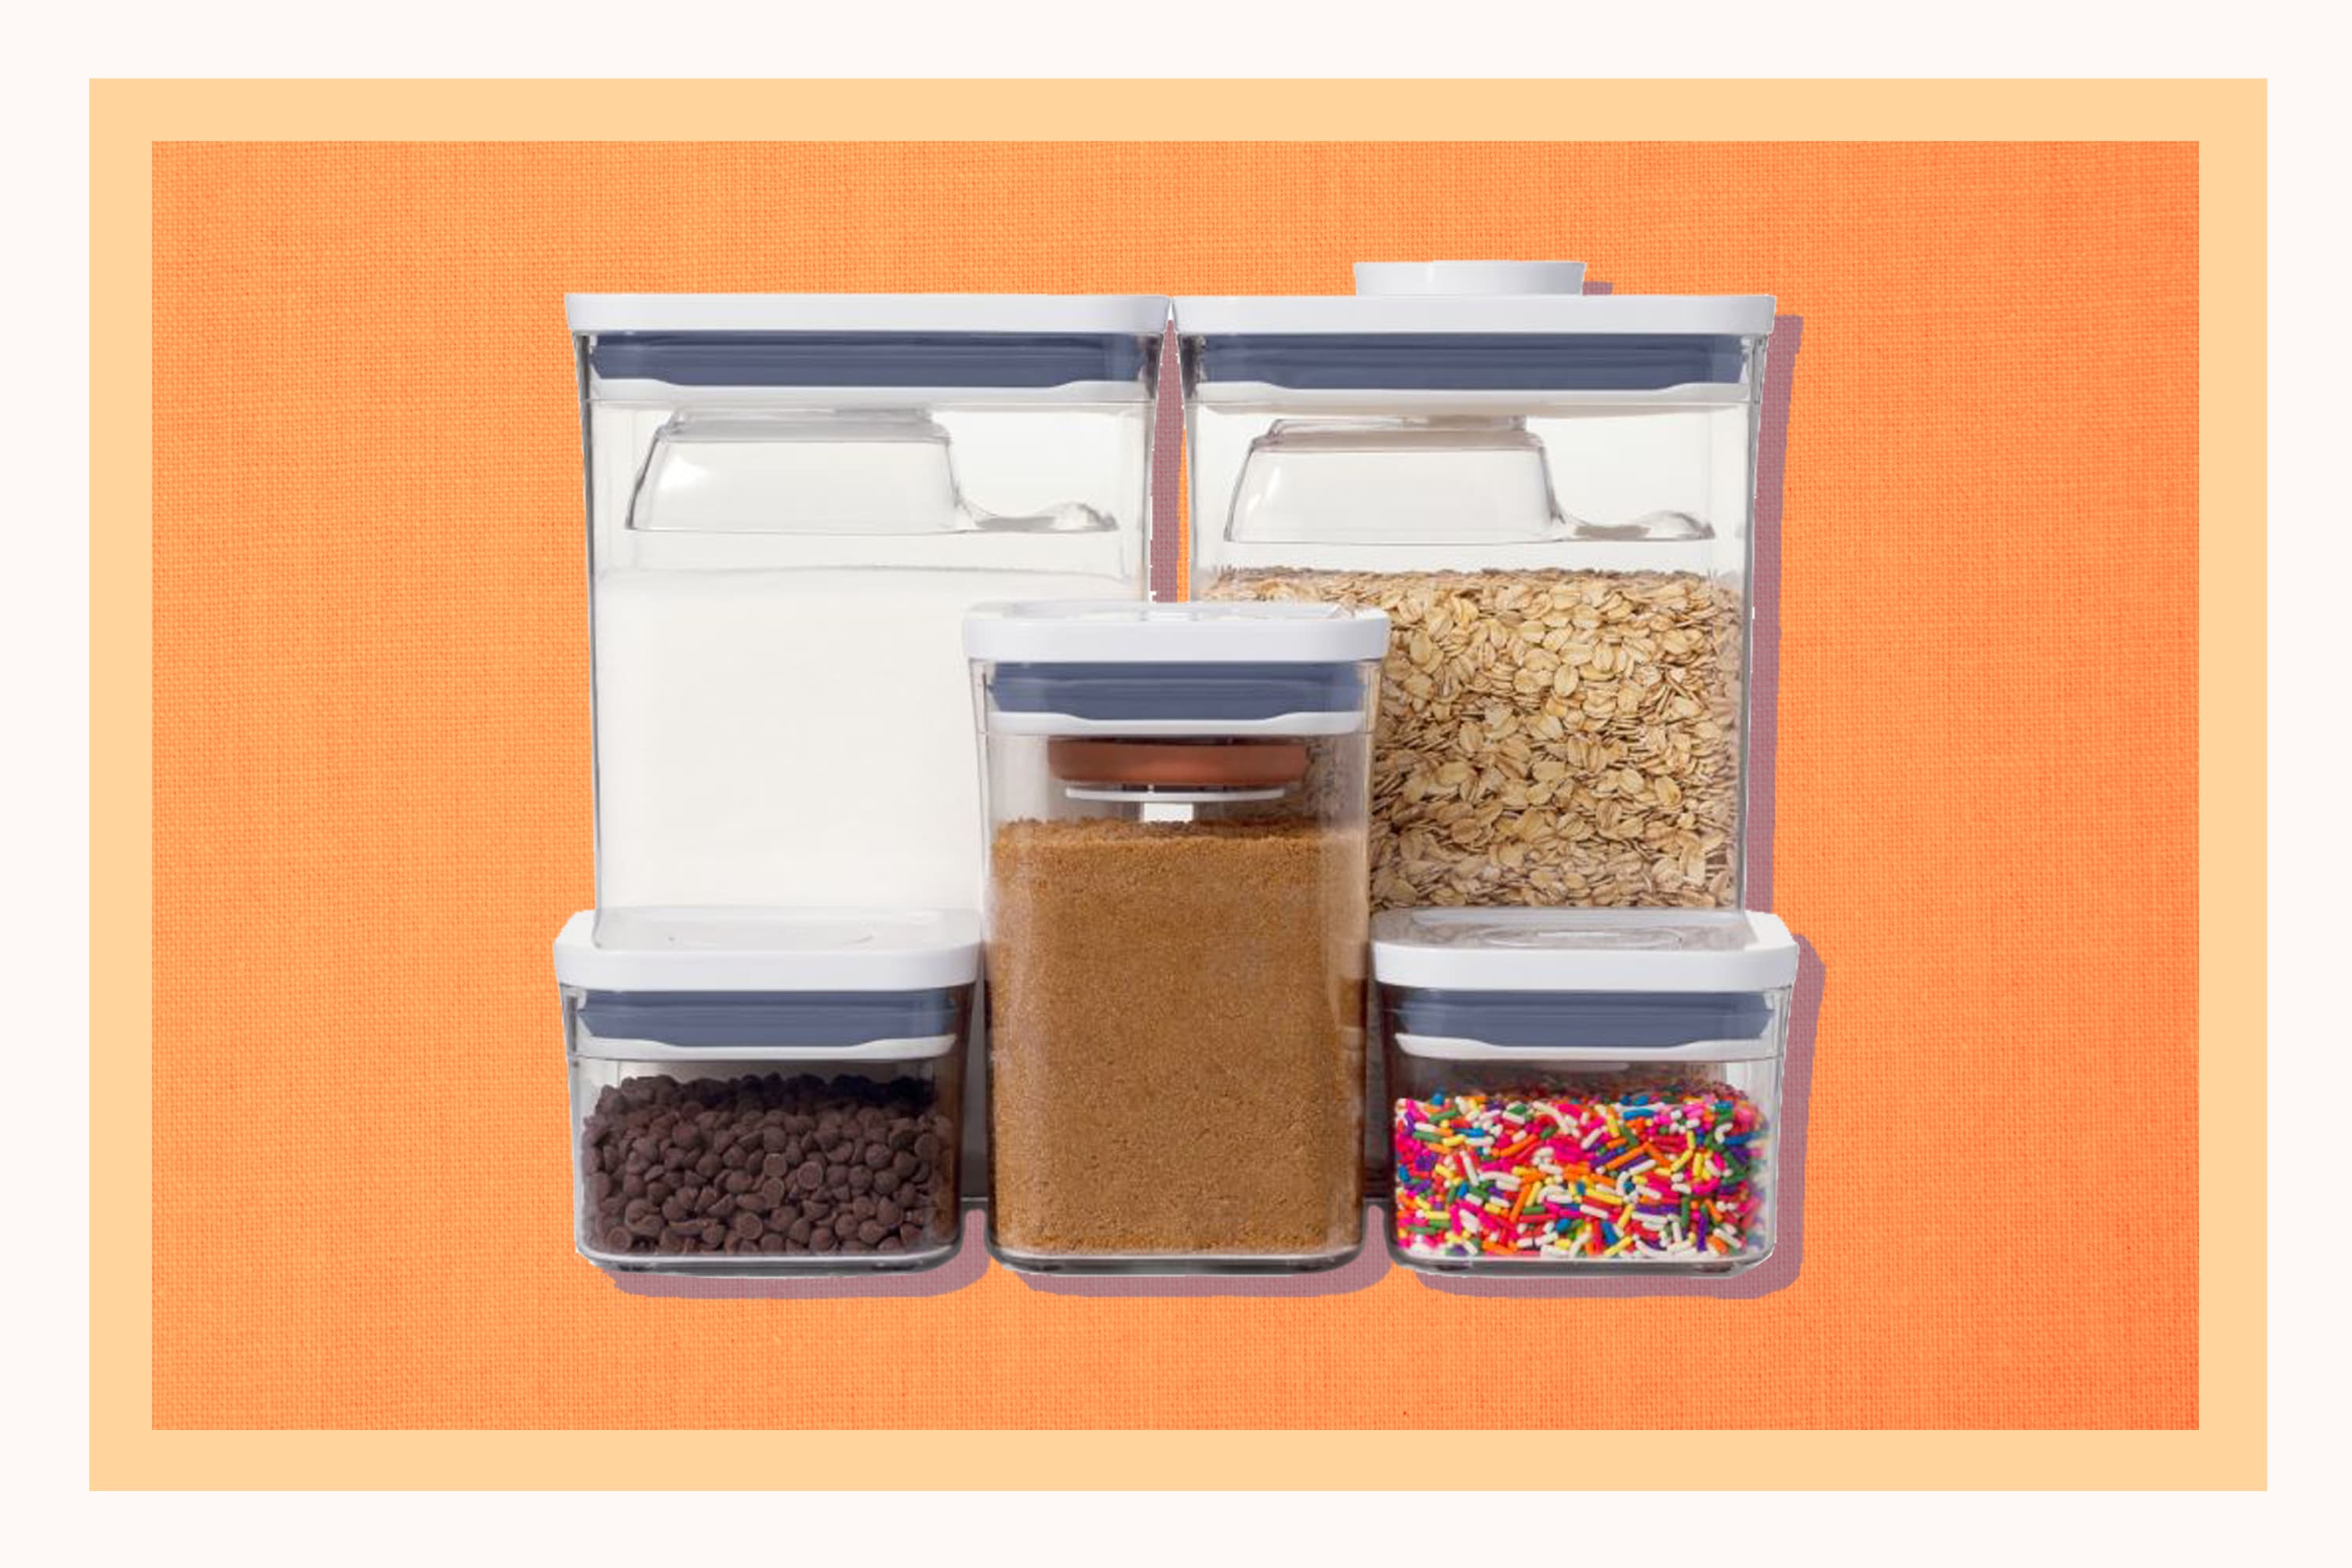 OXO Storage Containers Are Perfect For Small Kitchens - Forbes Vetted